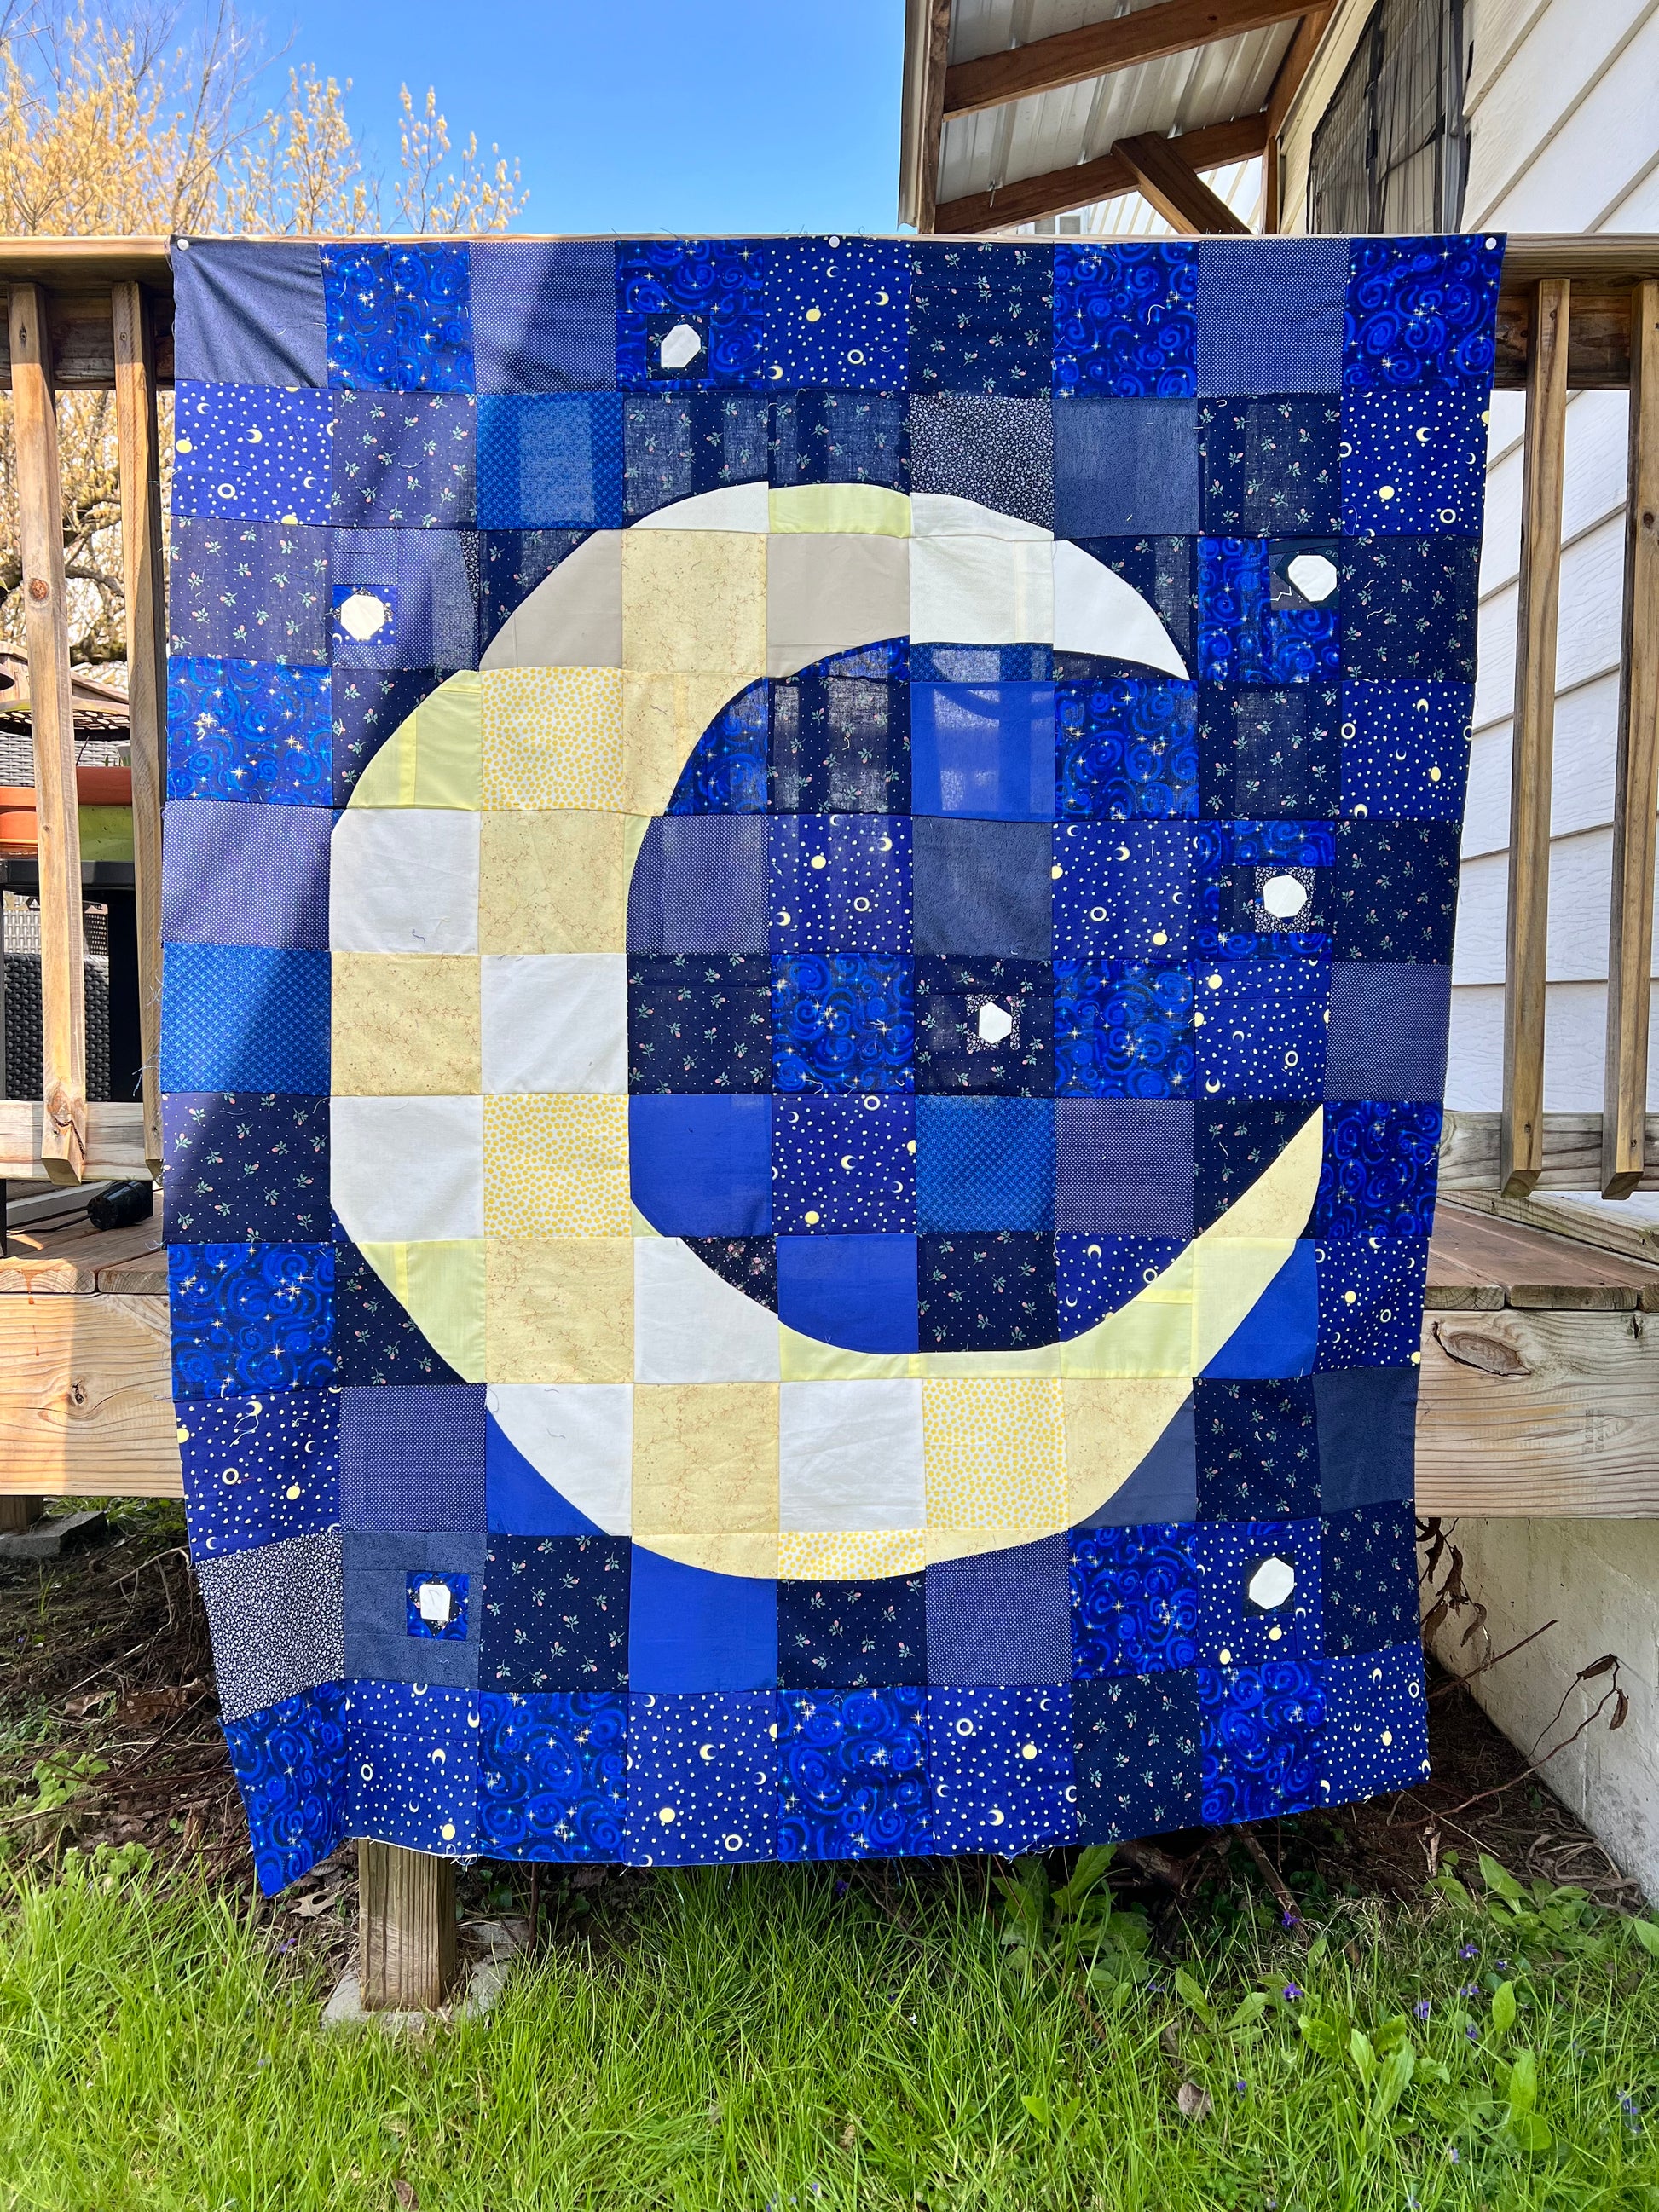 the quilt top only, prior to quilt sandwich and quilting. it hangs along a porch railing outside, with sun shining on it